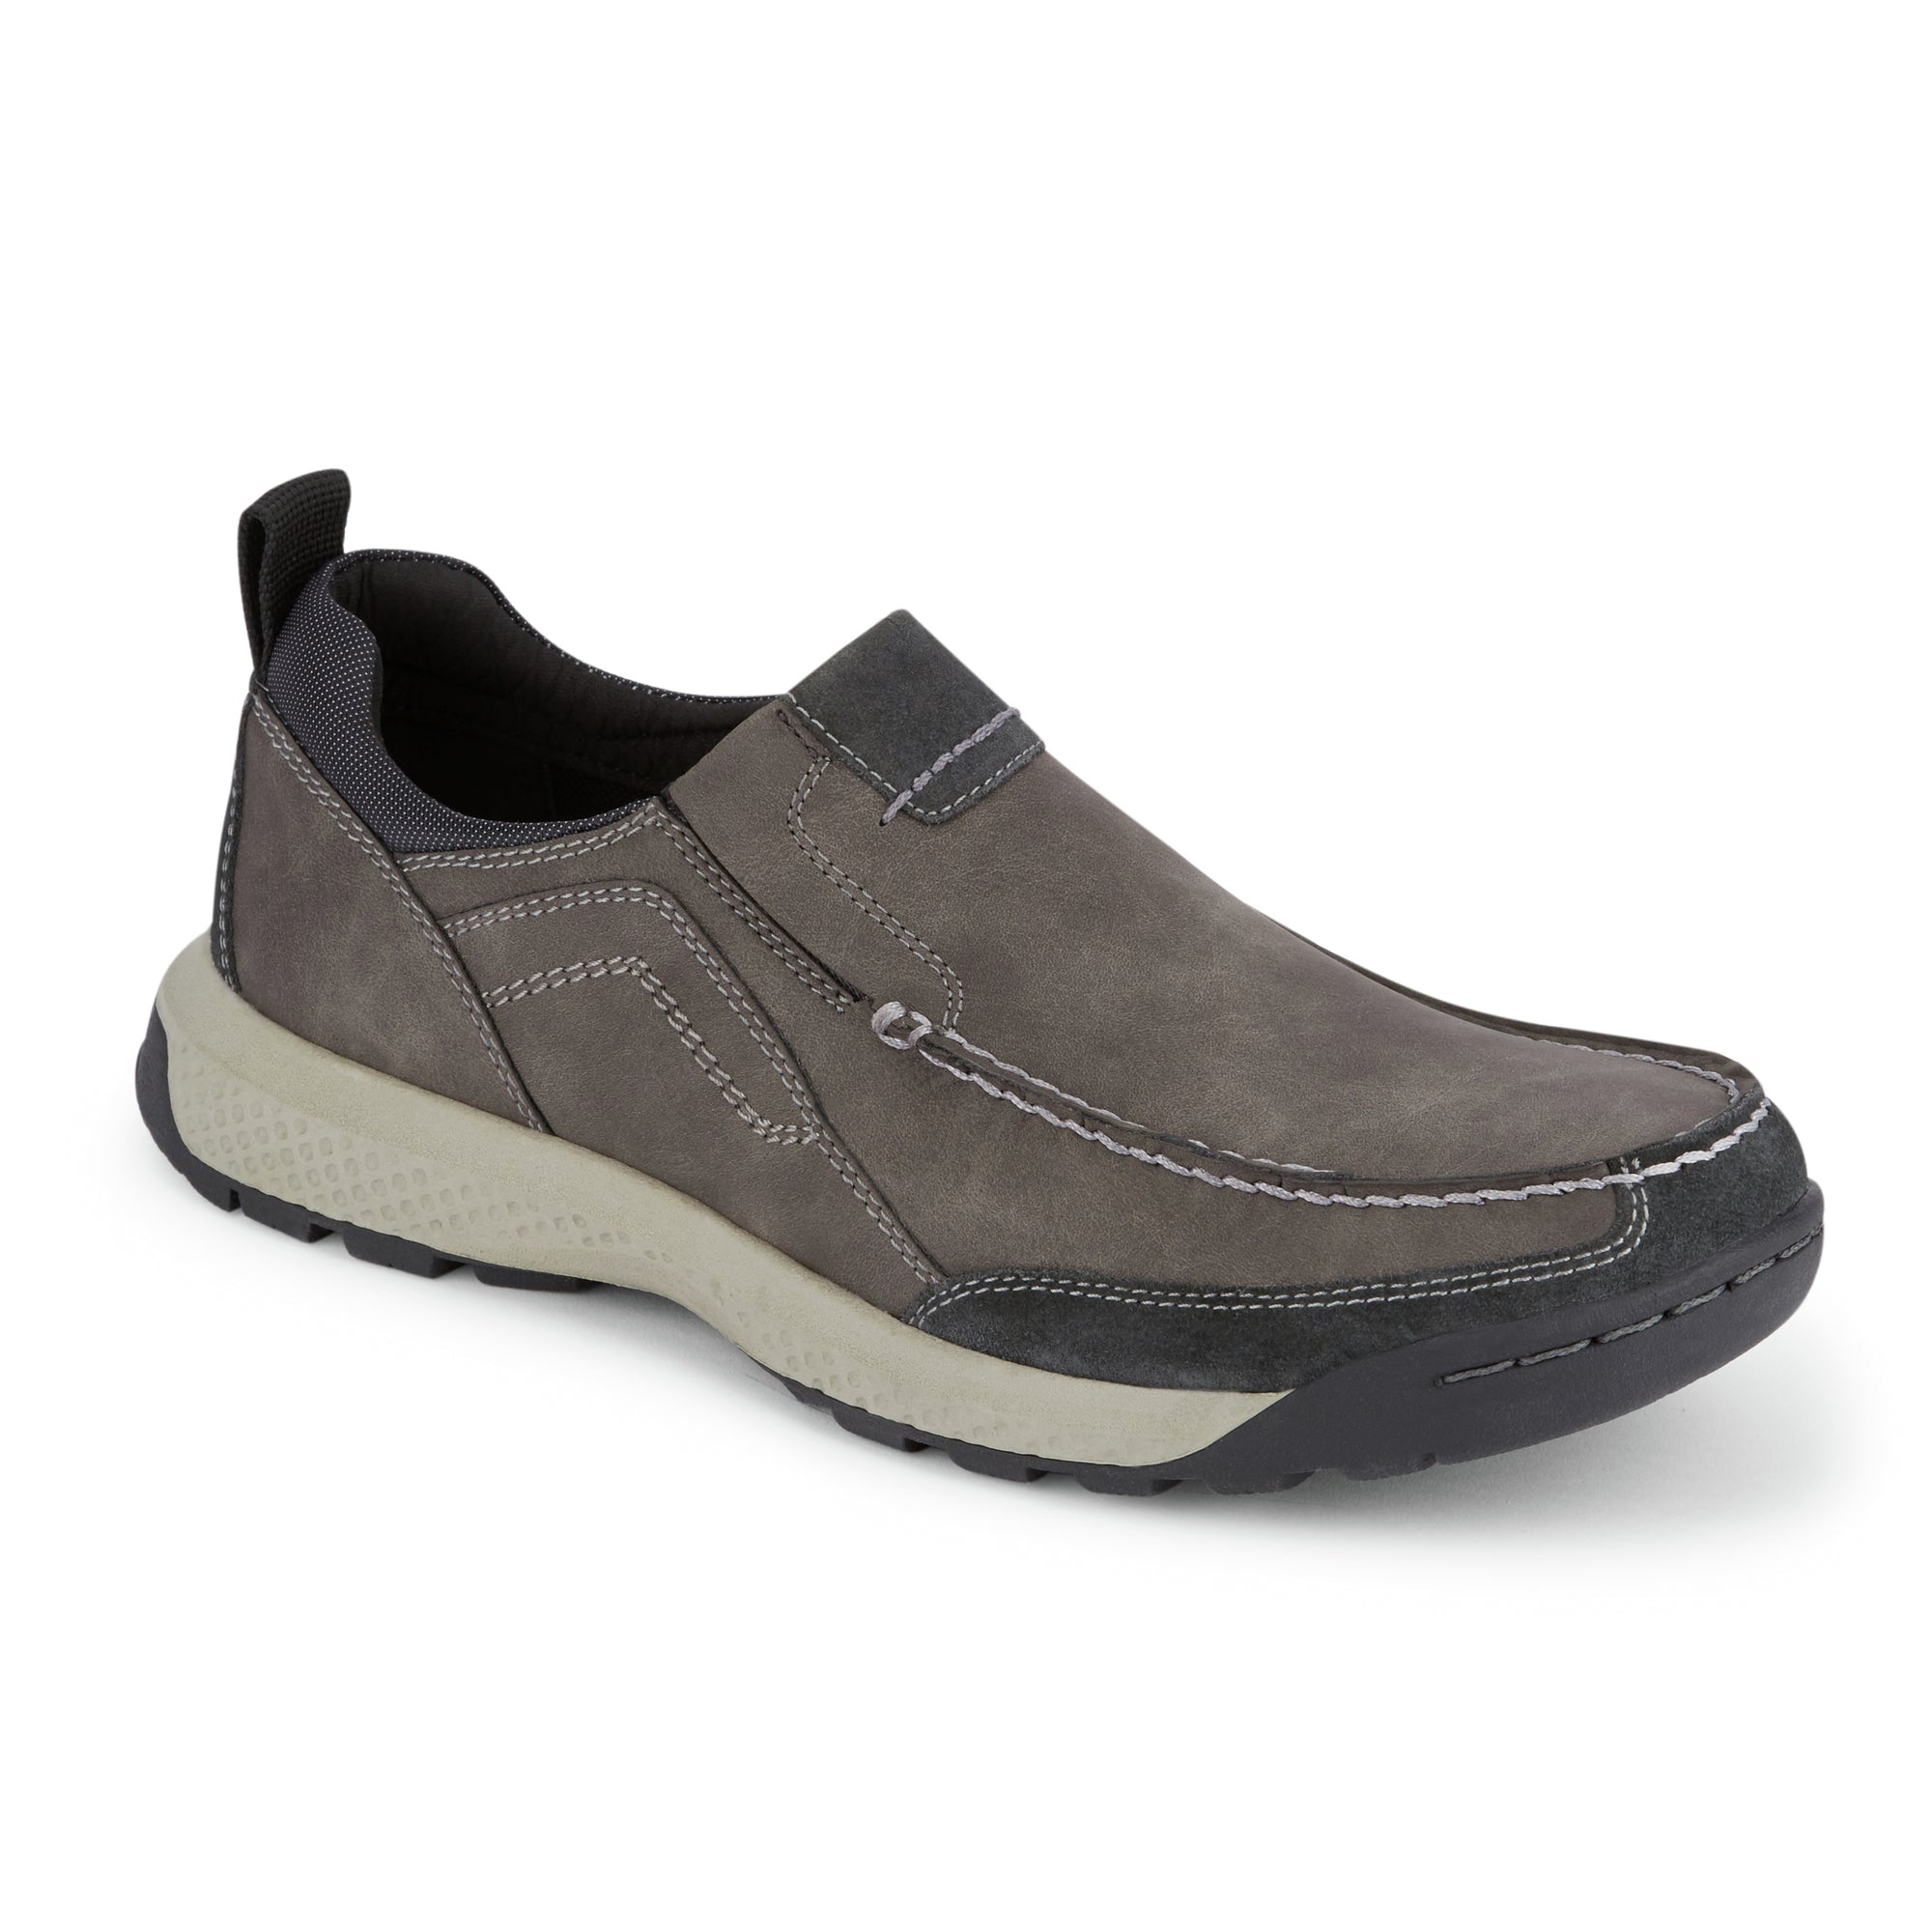 brown casual slip on shoes